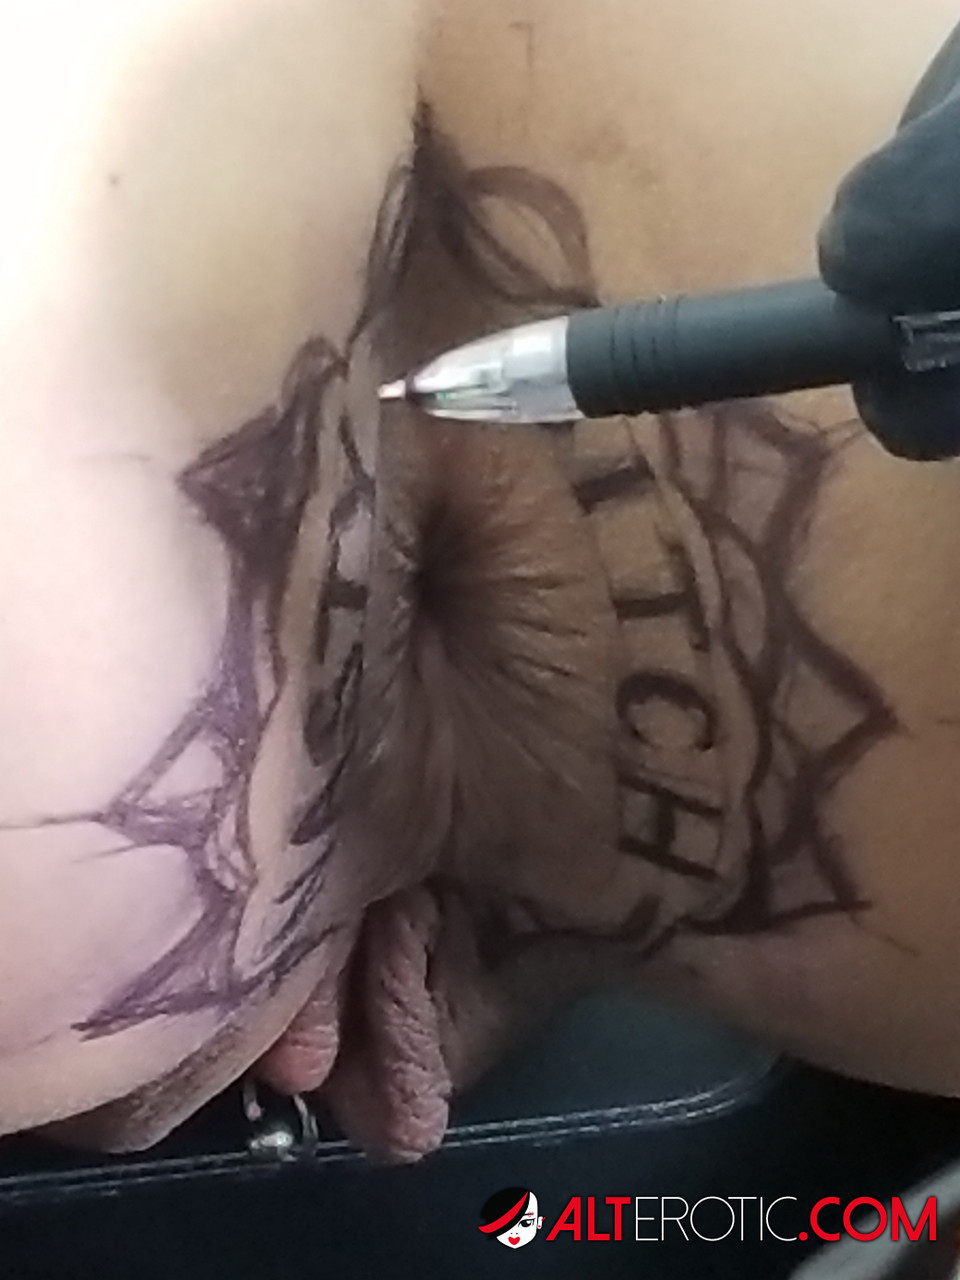 Latina chick Kitty Jaguar gets a butt tattoo before being fucked porn photo #424168451 | Alt Erotic Pics, Kitty Jaguar, Tattoo, mobile porn